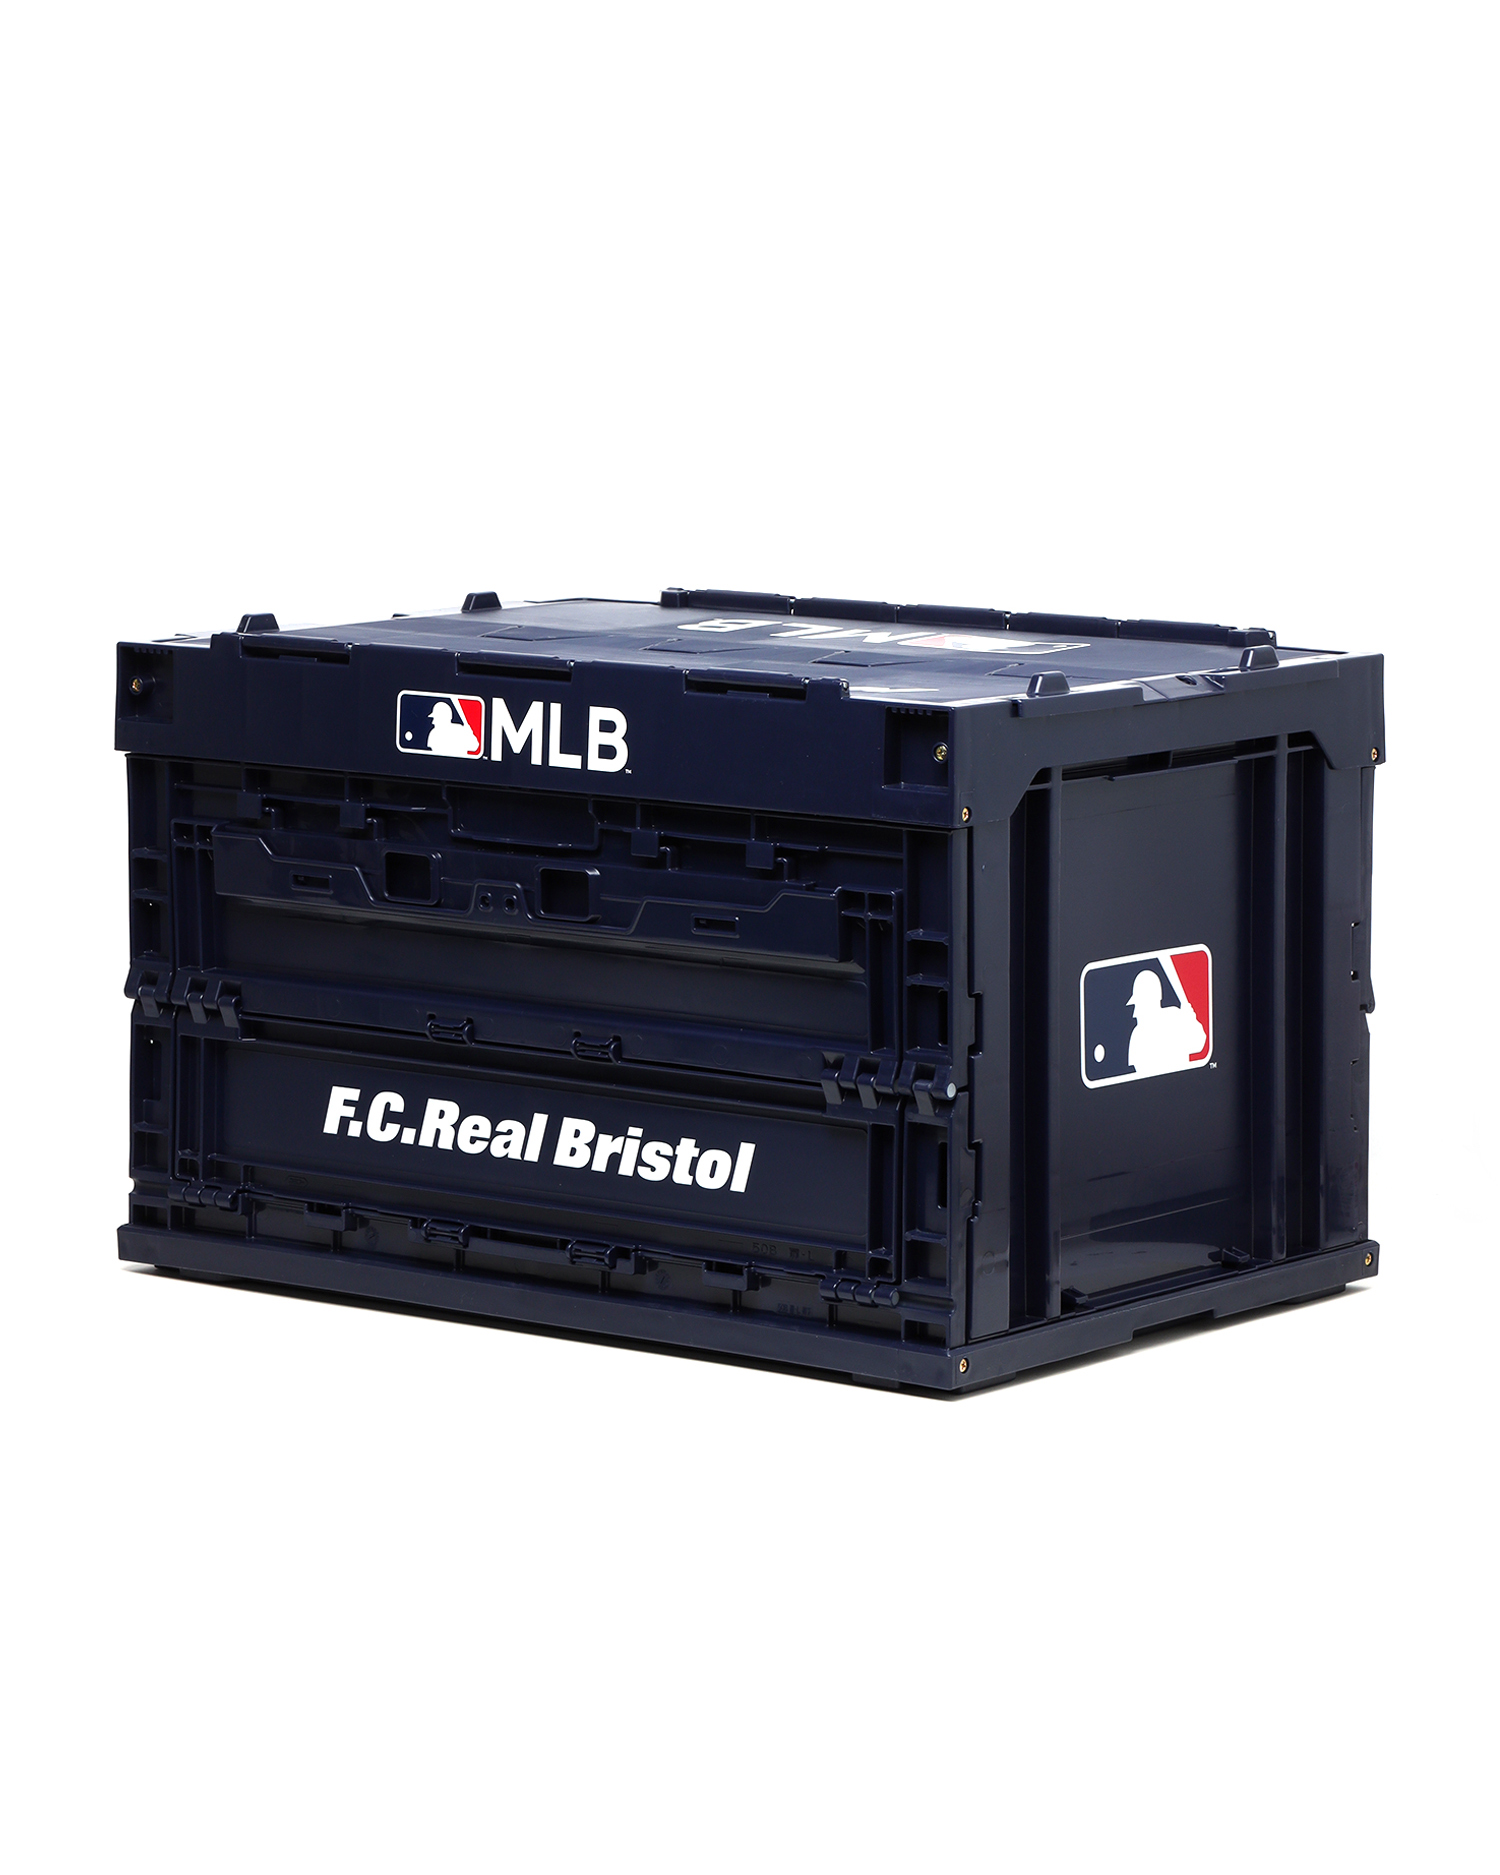 MLB tour large foldable container